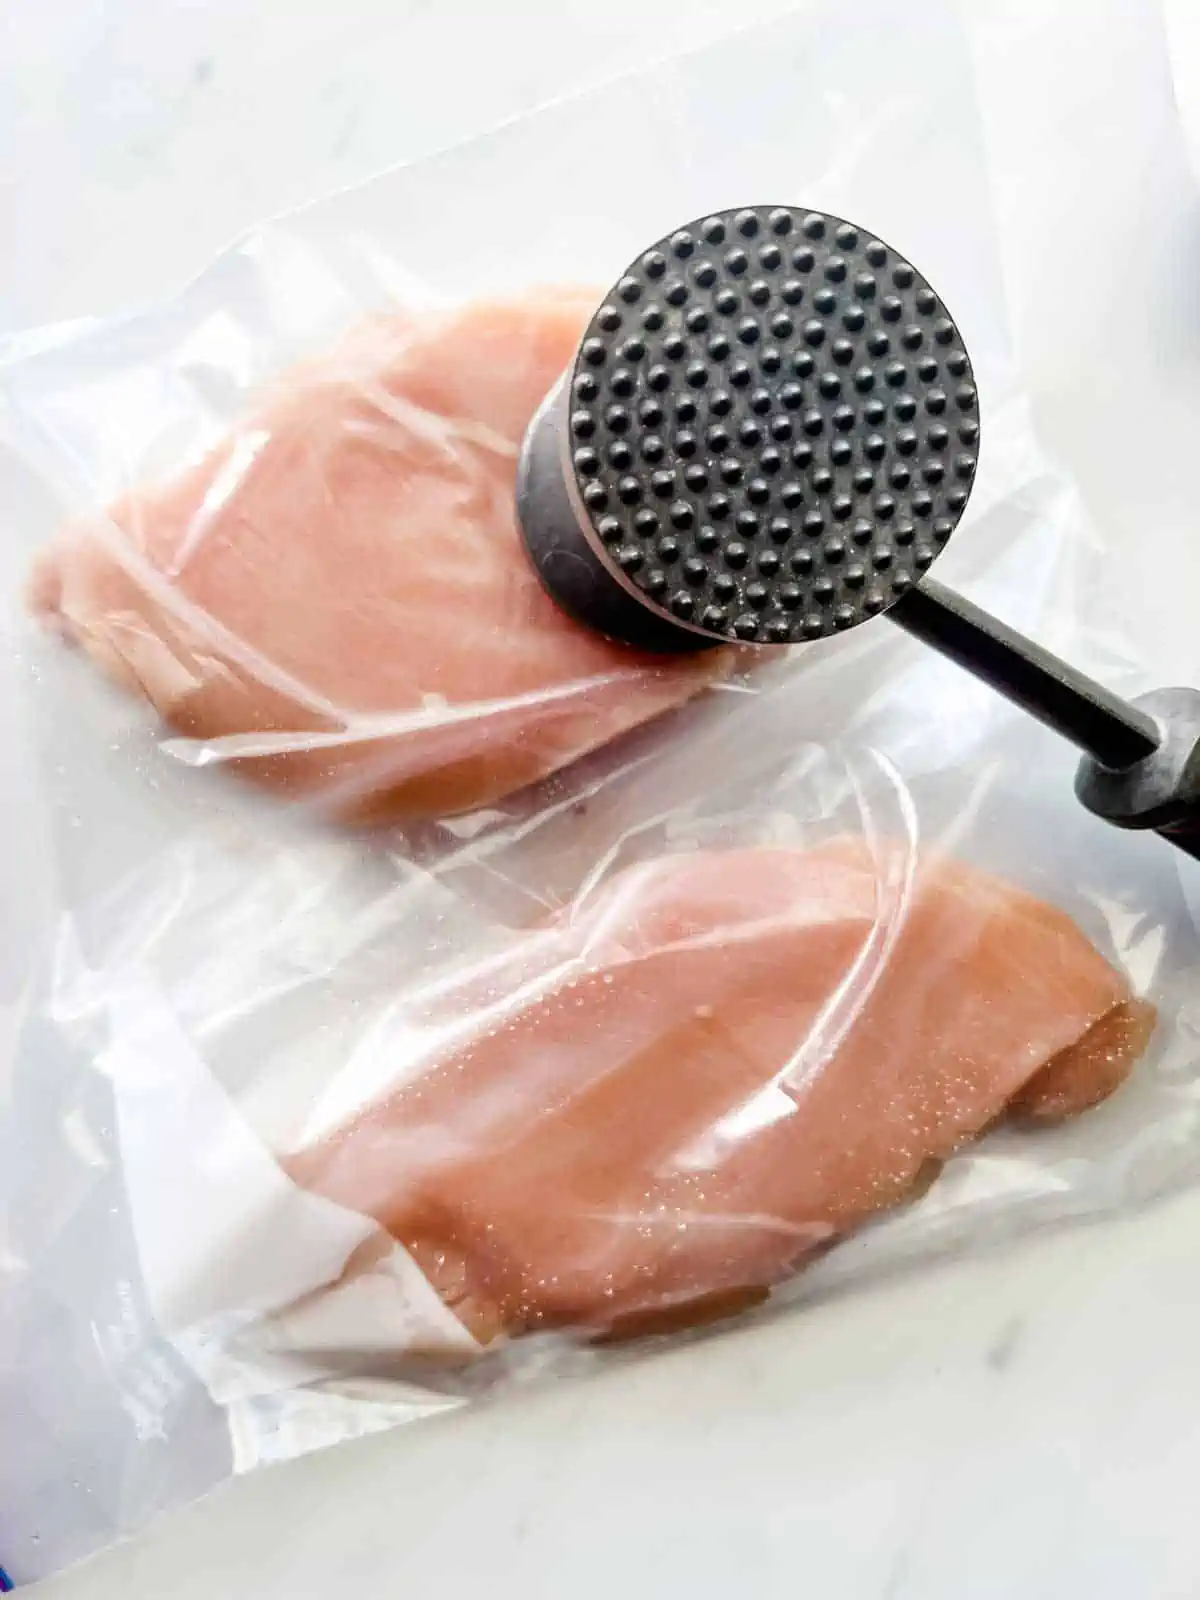 Chicken in a plastic bag being pounded with a meat mallet.